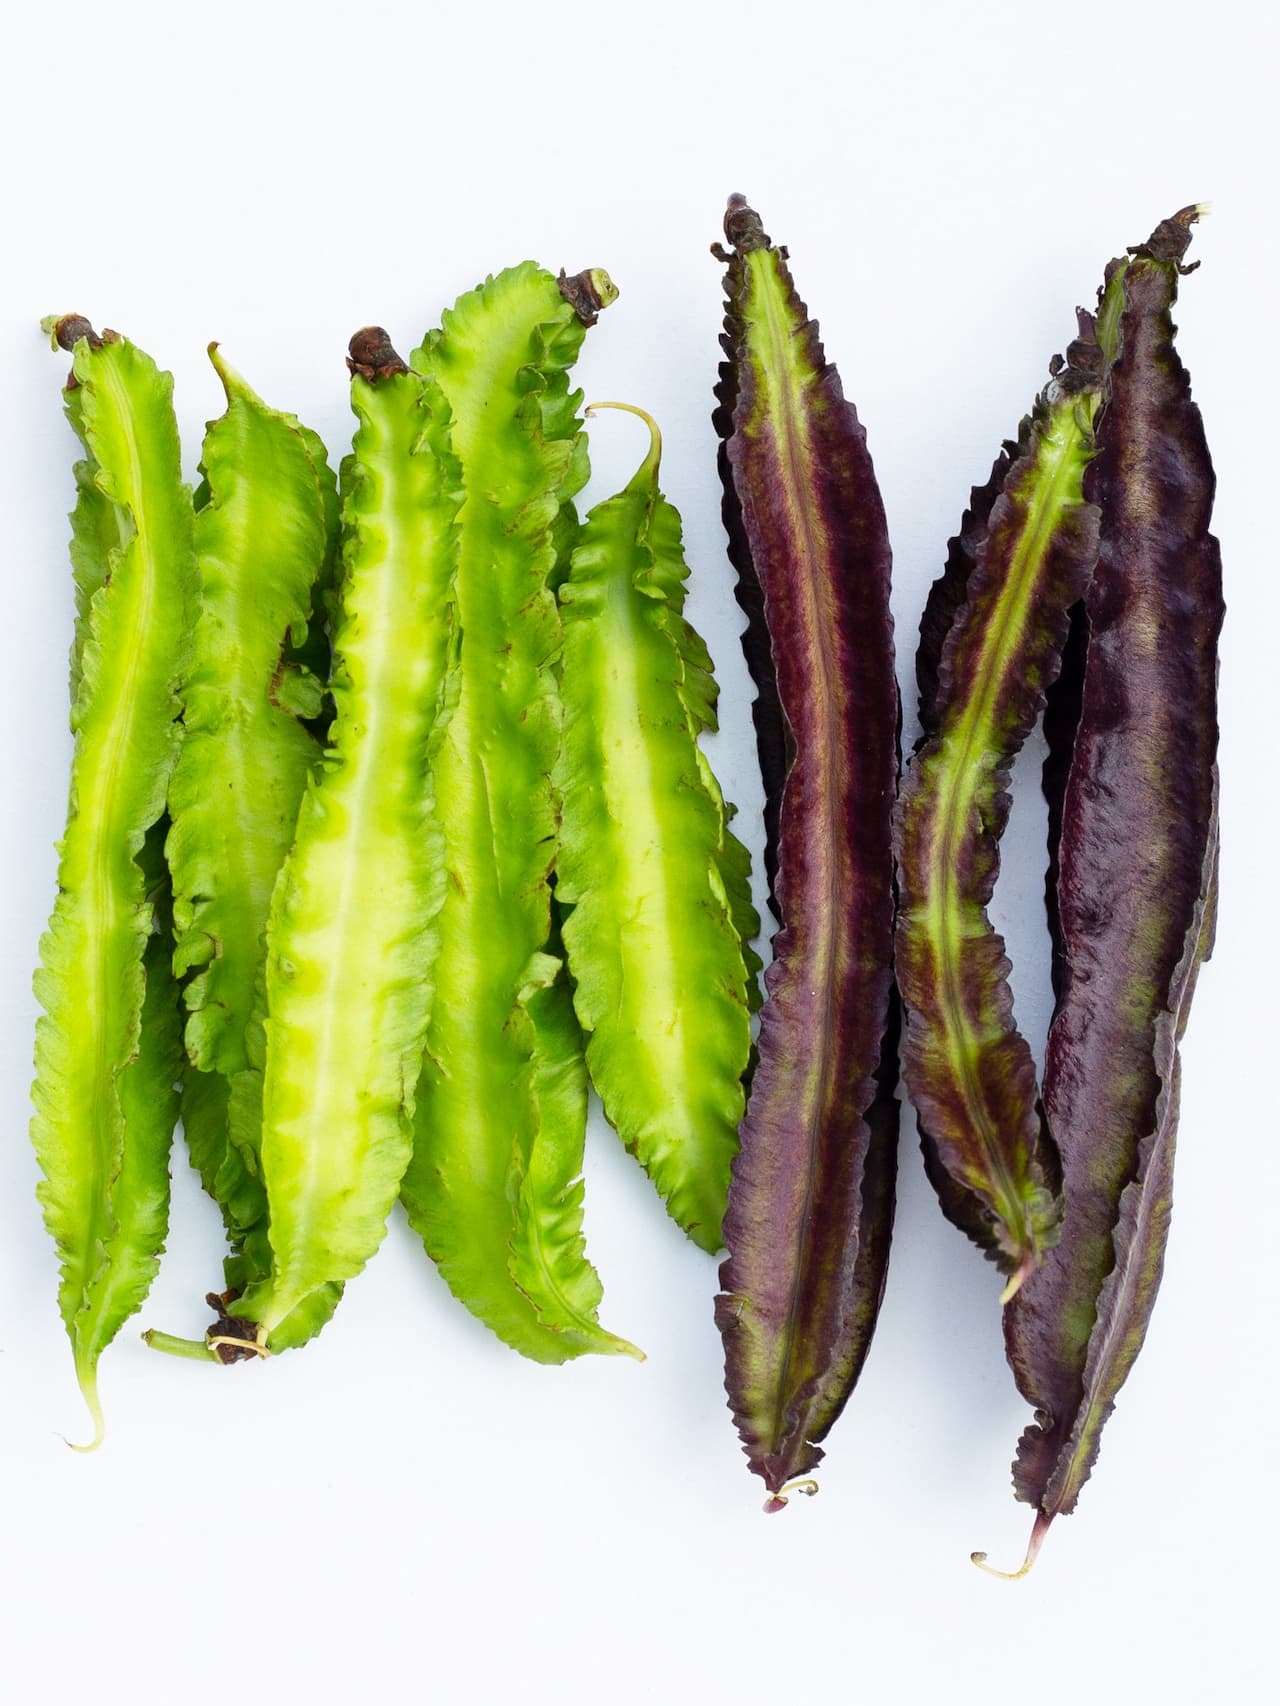 8 Health Benefits That Winged Beans Have for You